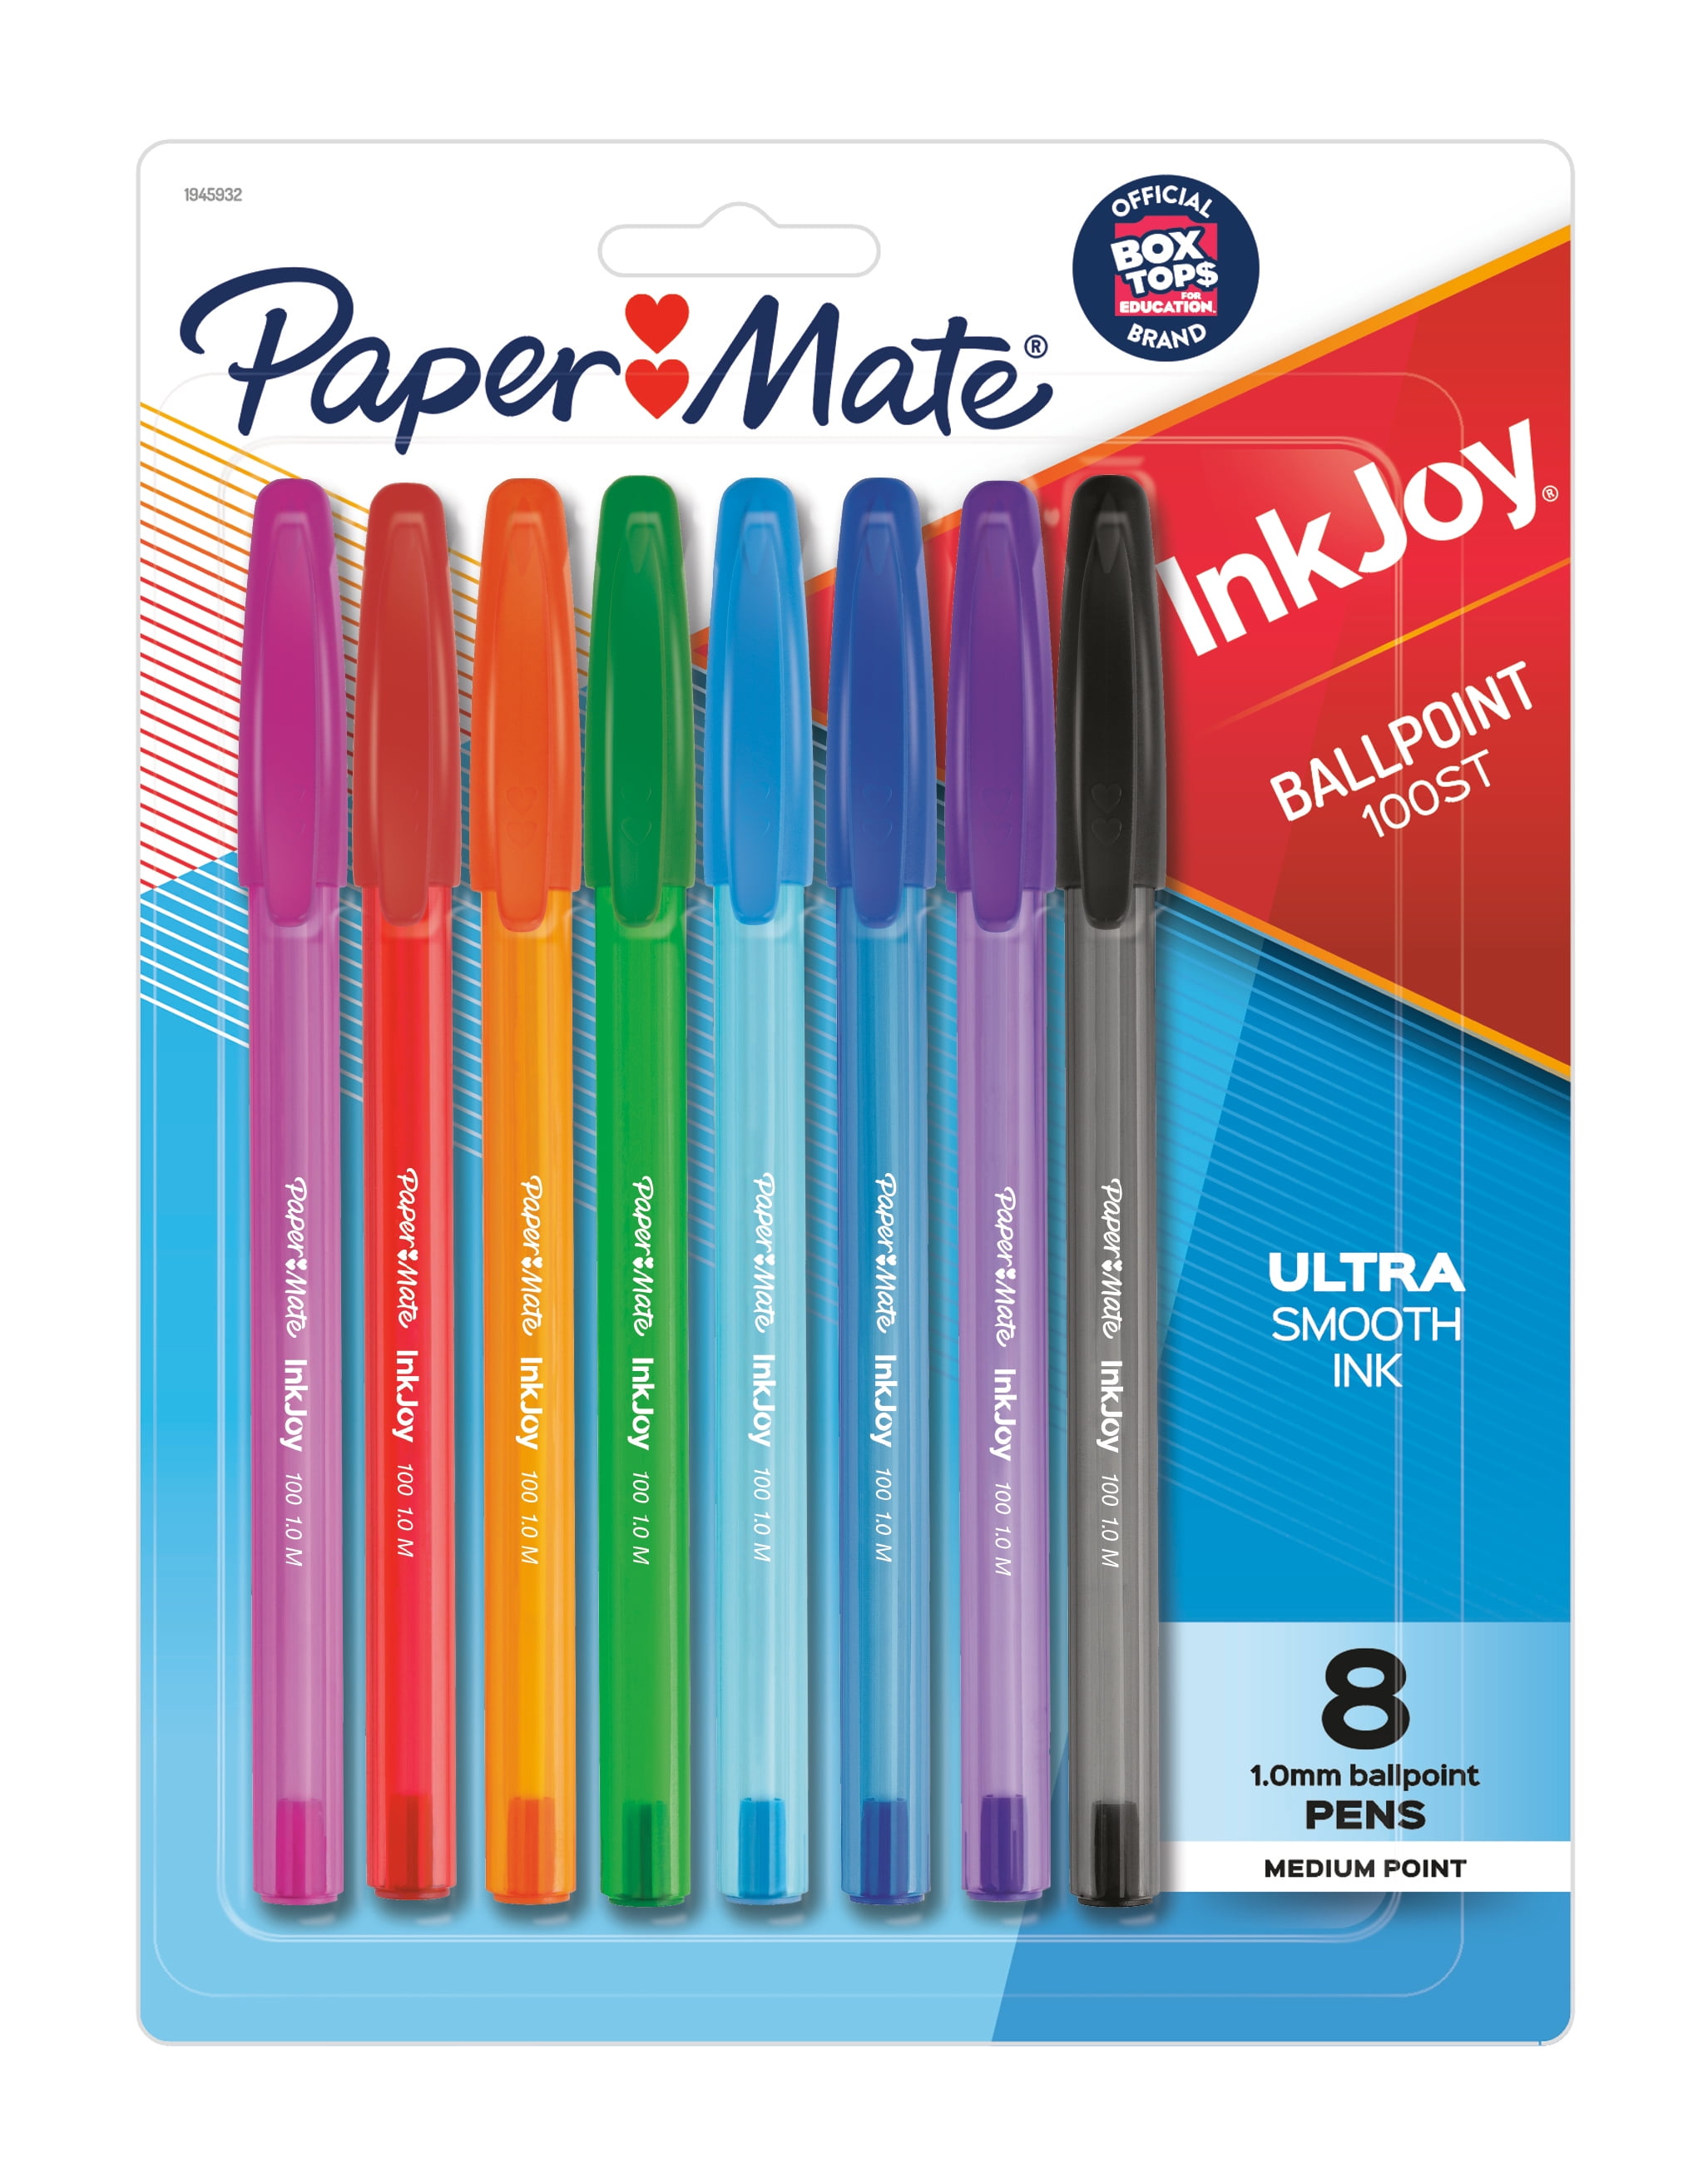 Buy Sketch Pens Assorted pack of 12 shades, Full size Online in